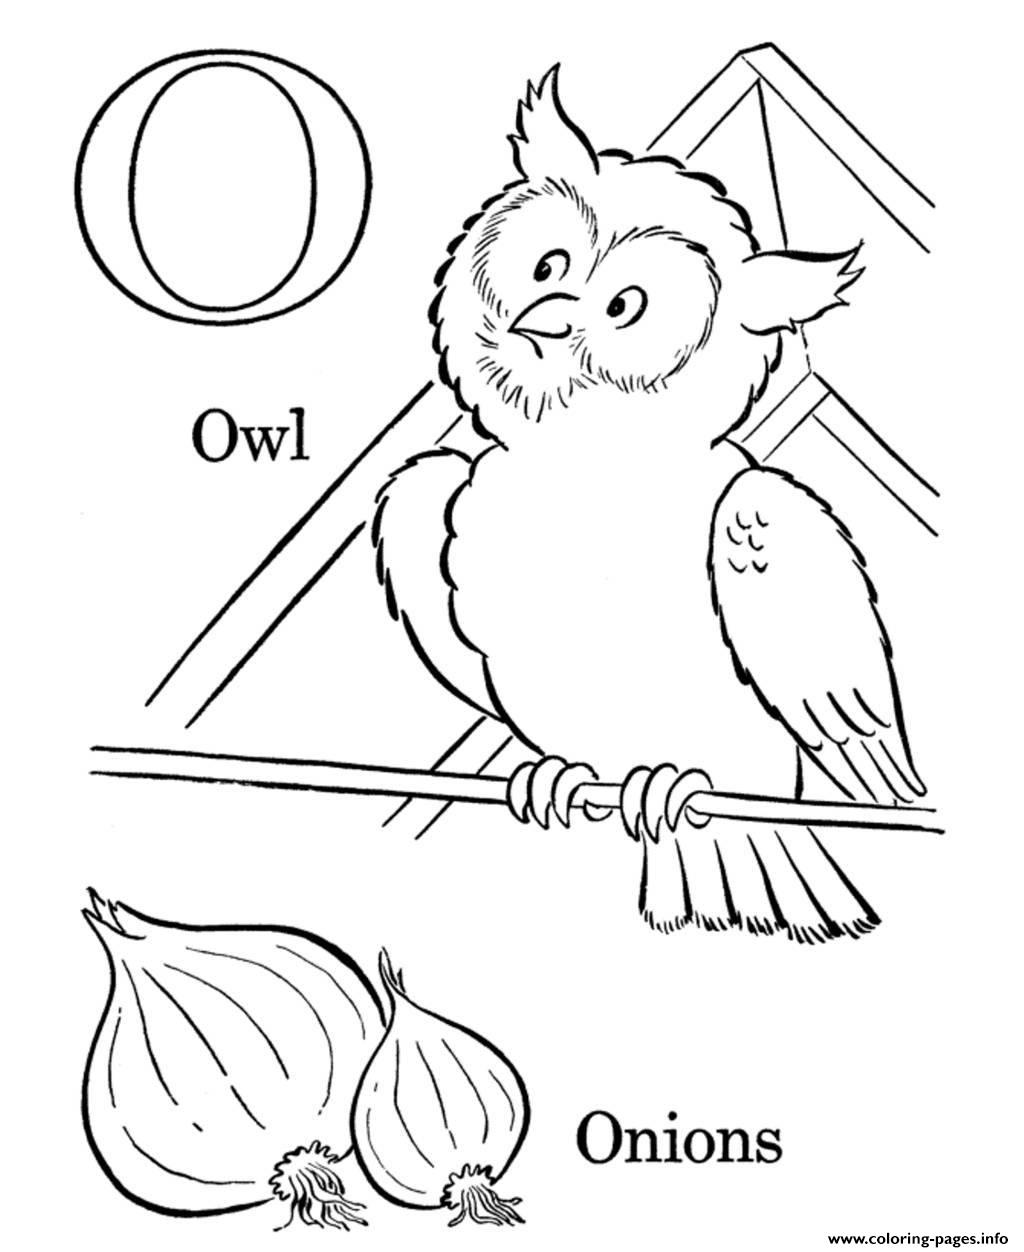 Download Onions And Owl Alphabet S3989 Coloring Pages Printable